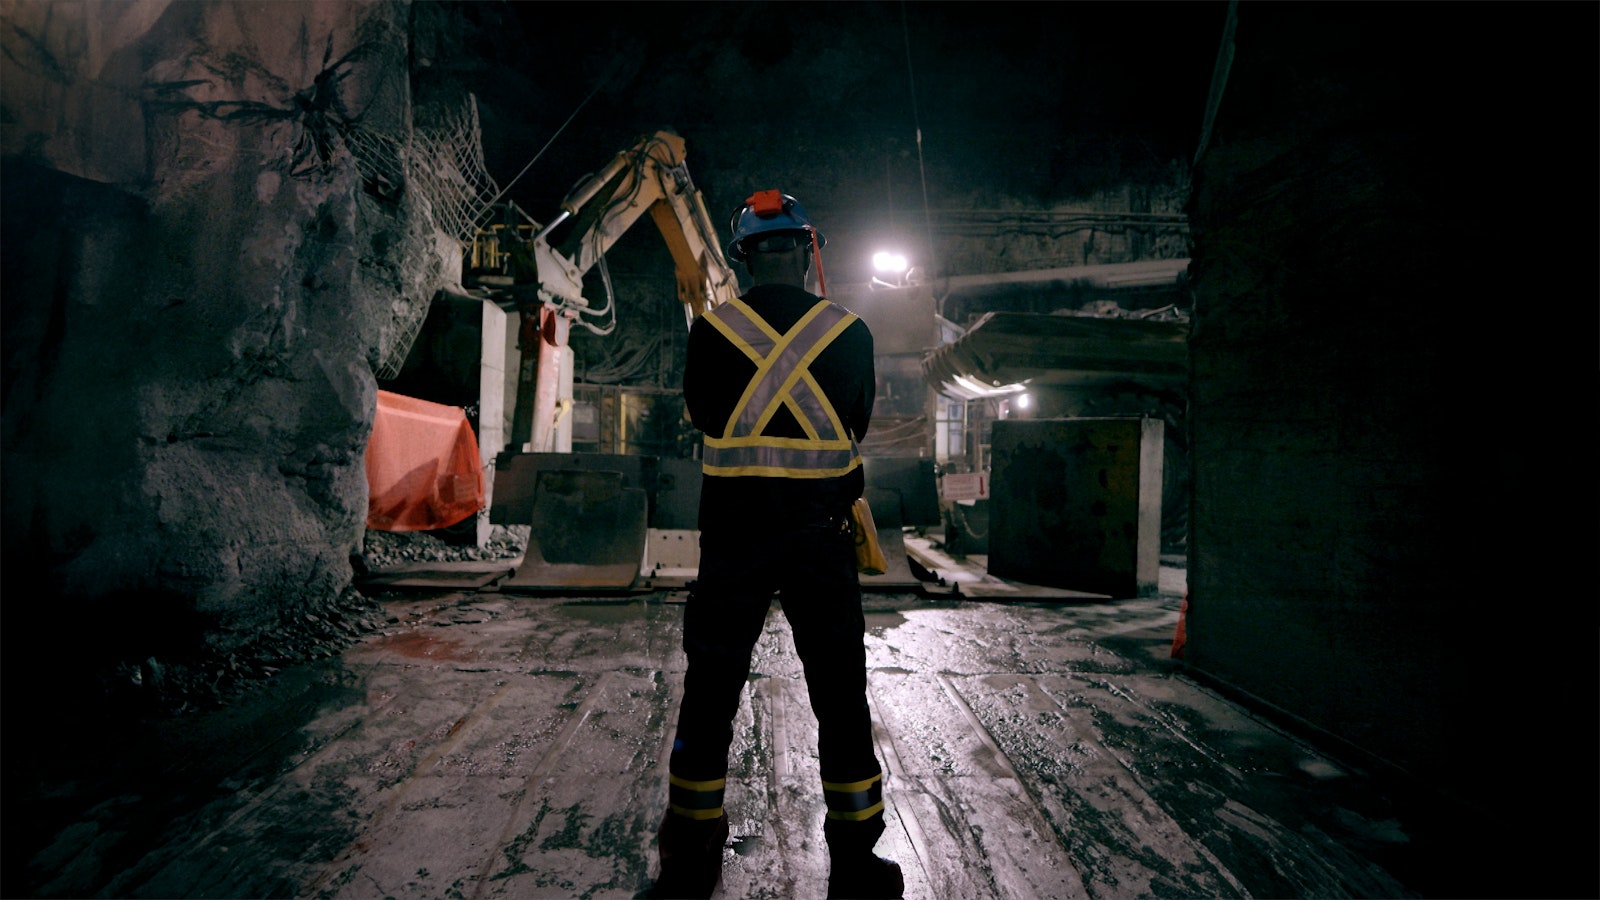 A miner stands in dark blue safety gear with yellow visibility sashes in front of the mine’s machinery.